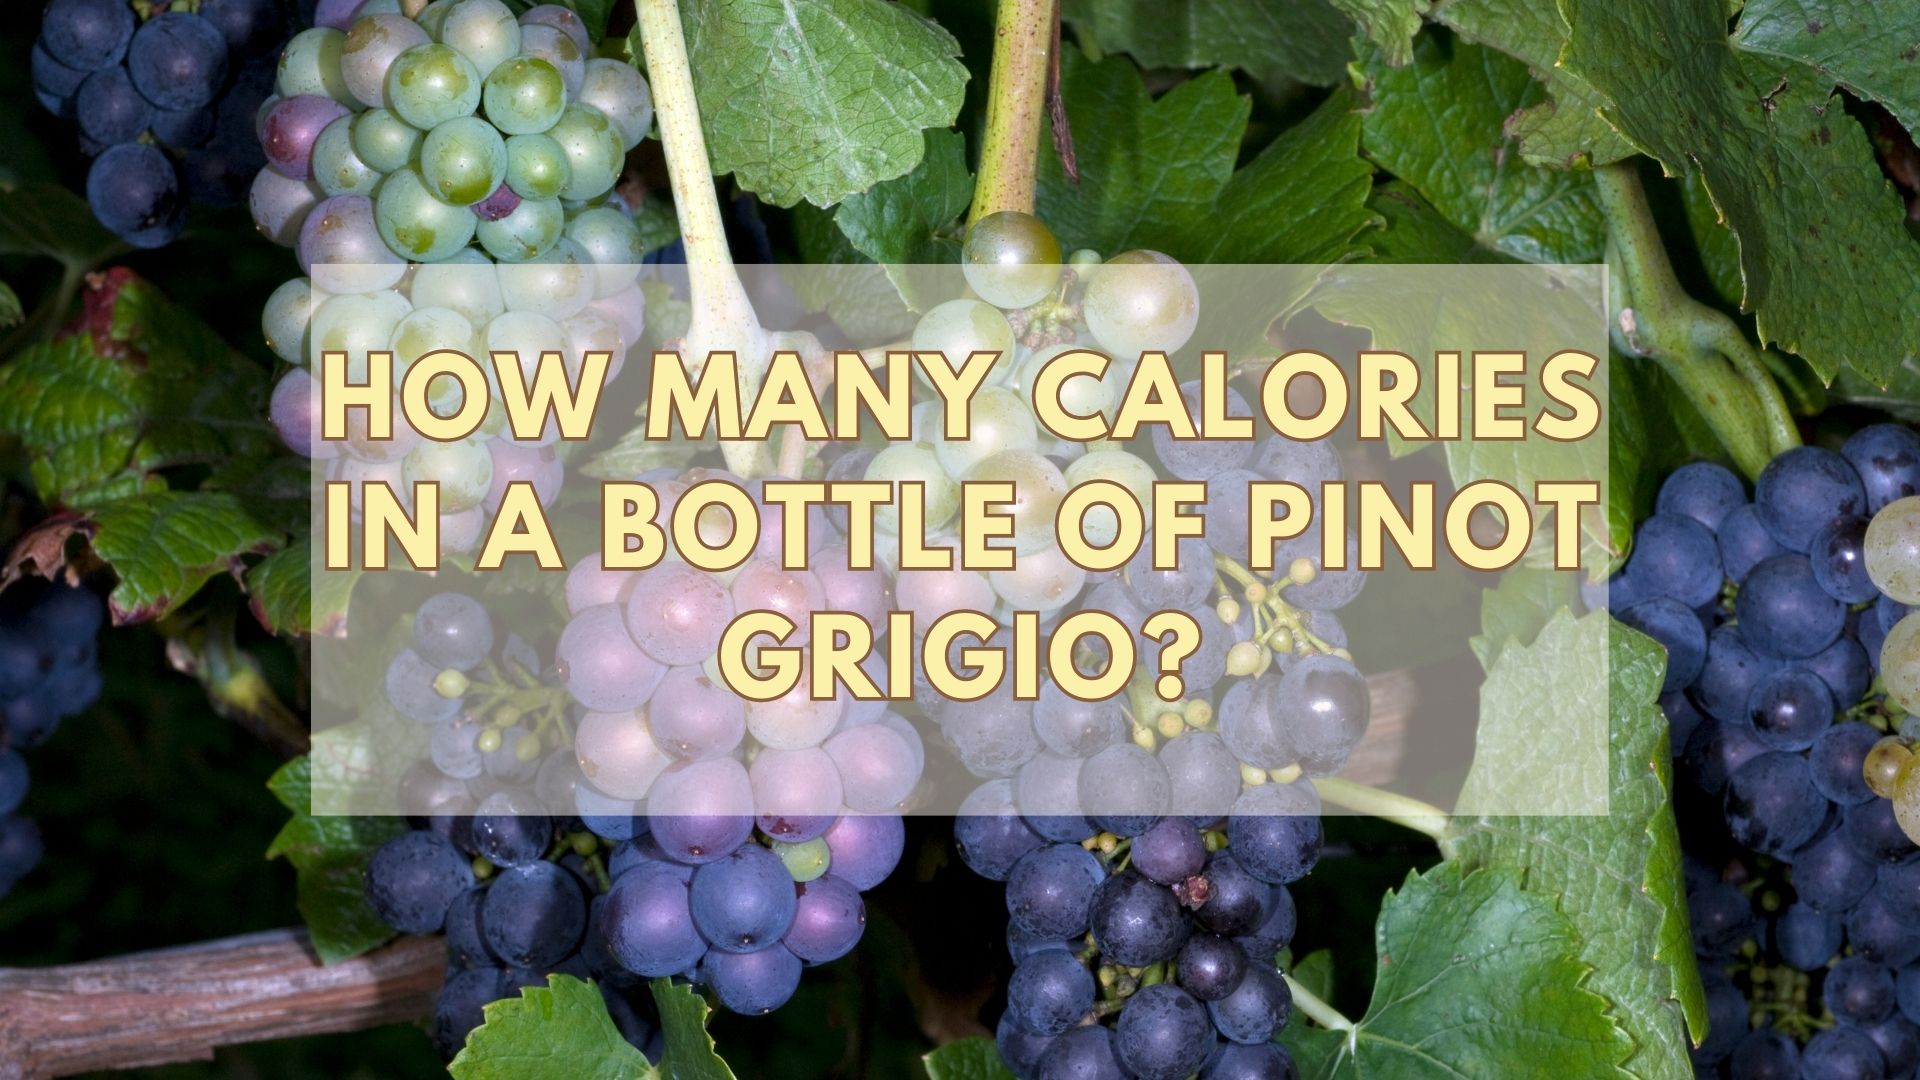 How Many Calories In A Bottle Of Pinot Grigio